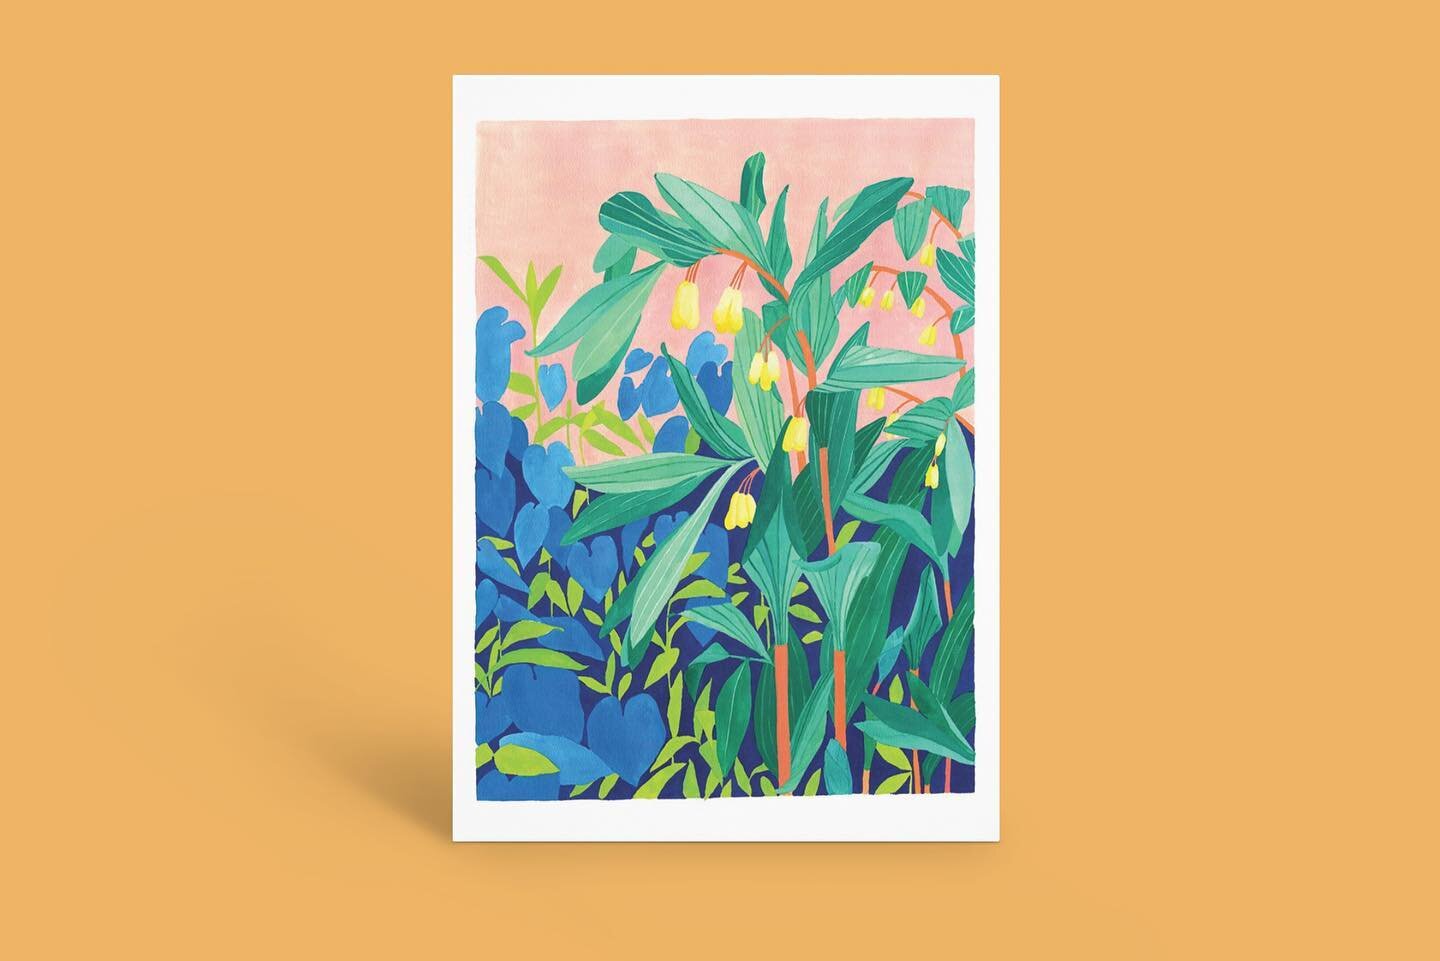 AHD NEW : Welcome back to AHD artist @sars_stricko! This is Sarah&rsquo;s second series with AHD PAPER CO. and we are thrilled to have Sarah back.

Pictured is &lsquo;GEORGE TINDALE&rsquo; one of three beautiful gauche painted card designs, that has 